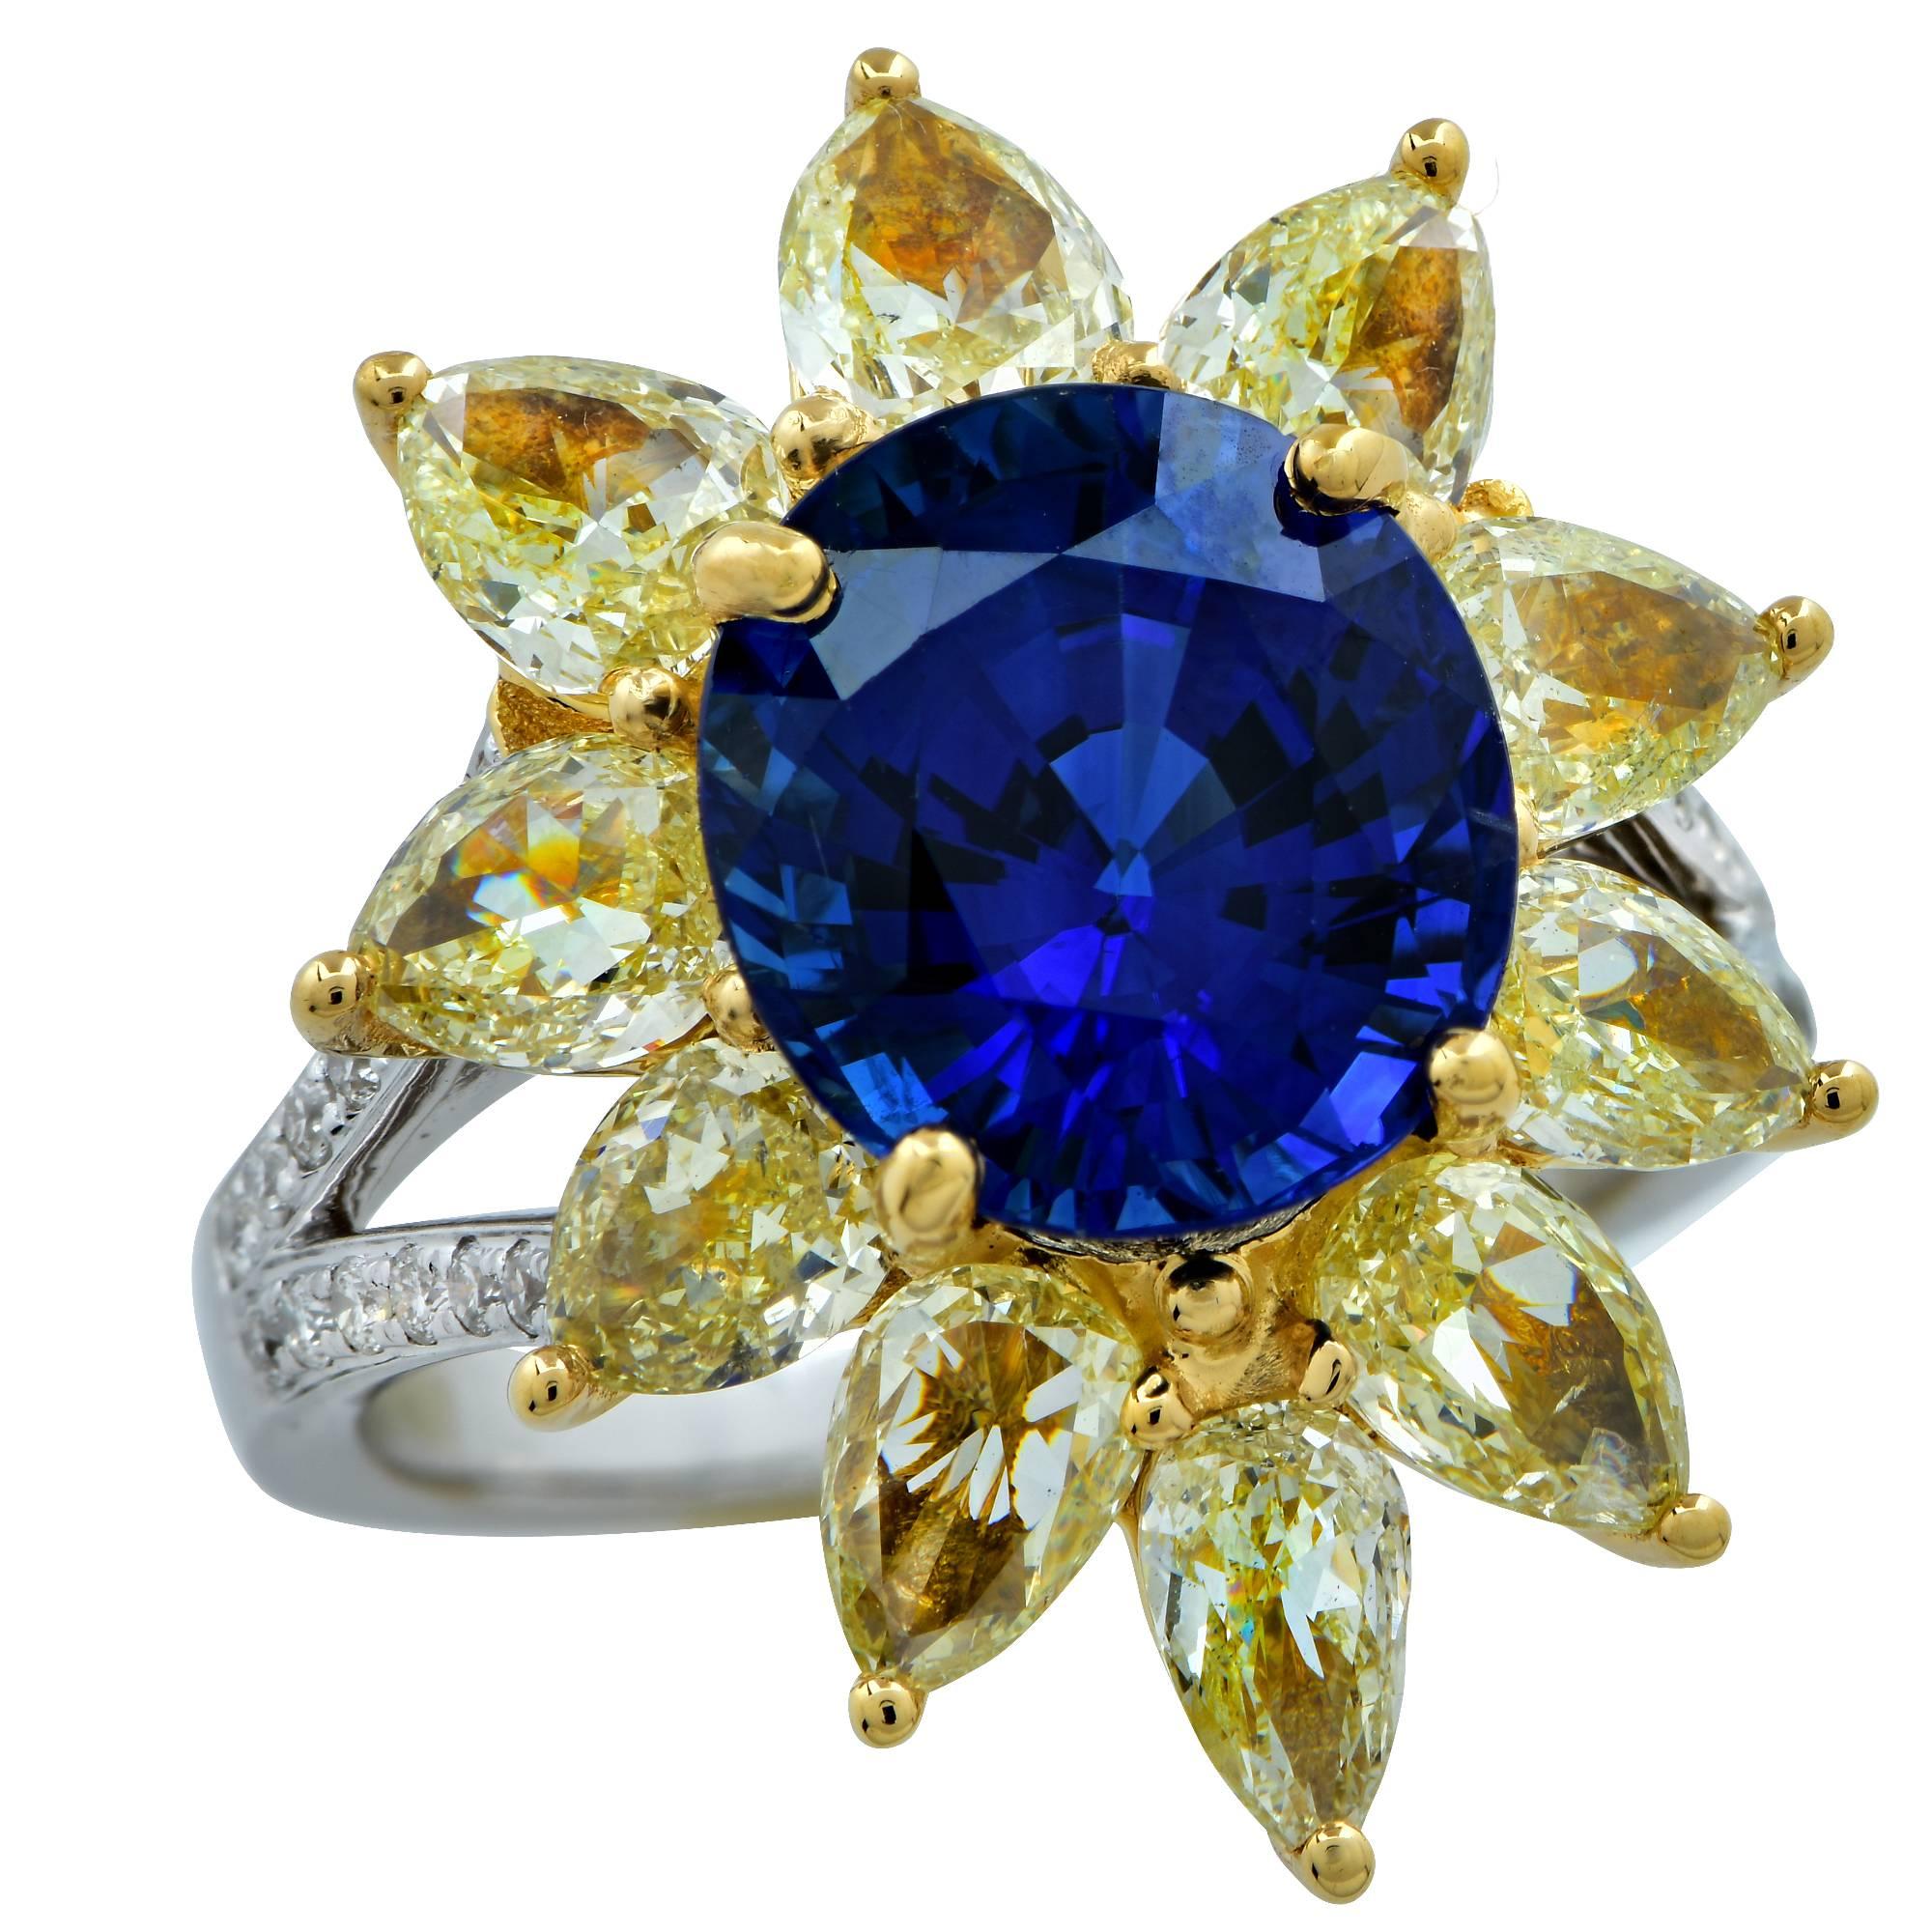 GIA Certified Madagascar Sapphire White and Fancy Yellow Diamond Ring